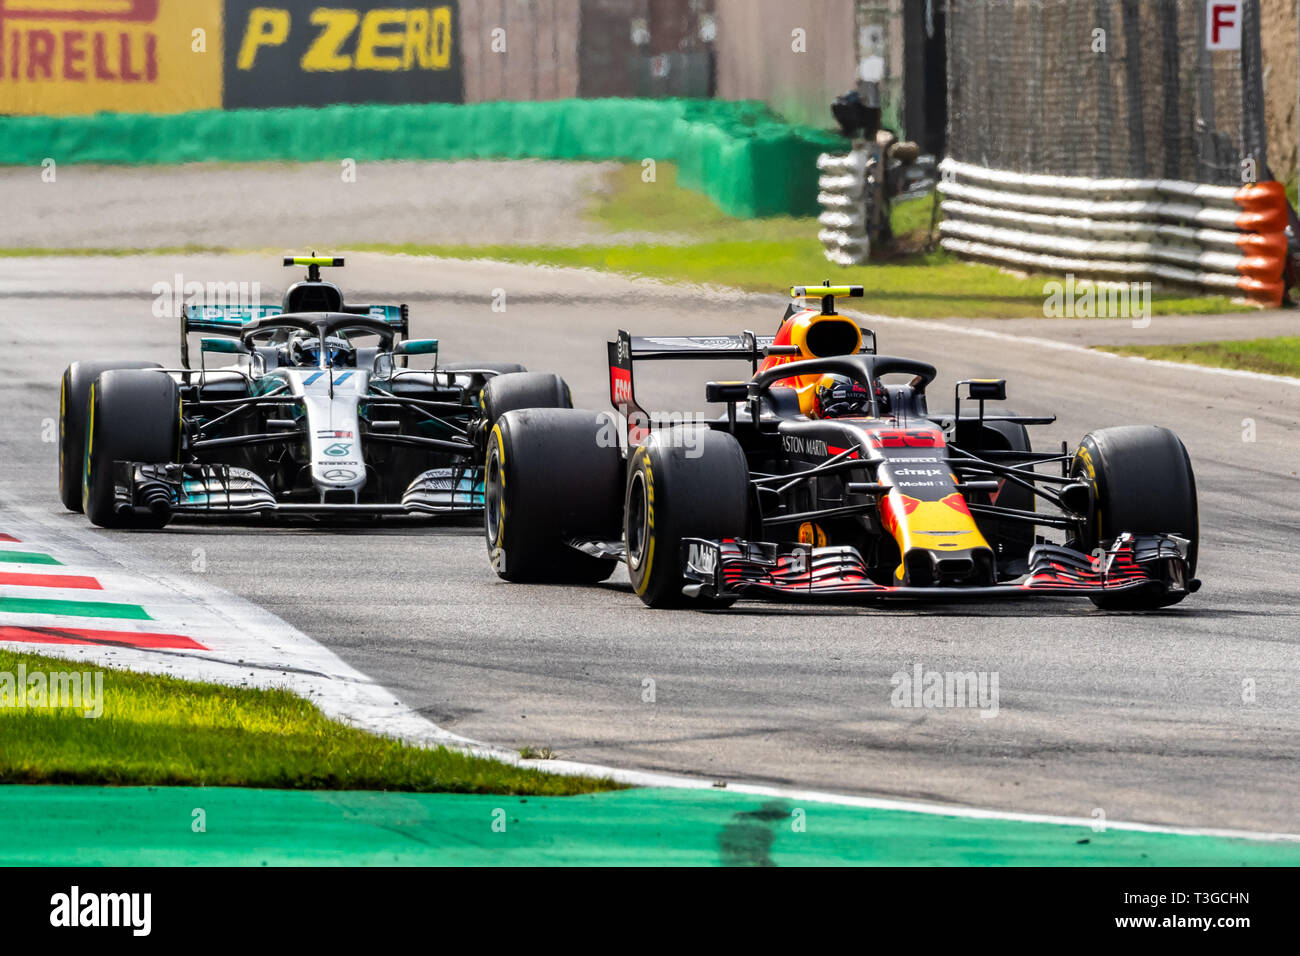 Monza/Italy - #33 Max Verstappen and #77 Valtteri Bottas fighting for  position during the Italian GP Stock Photo - Alamy